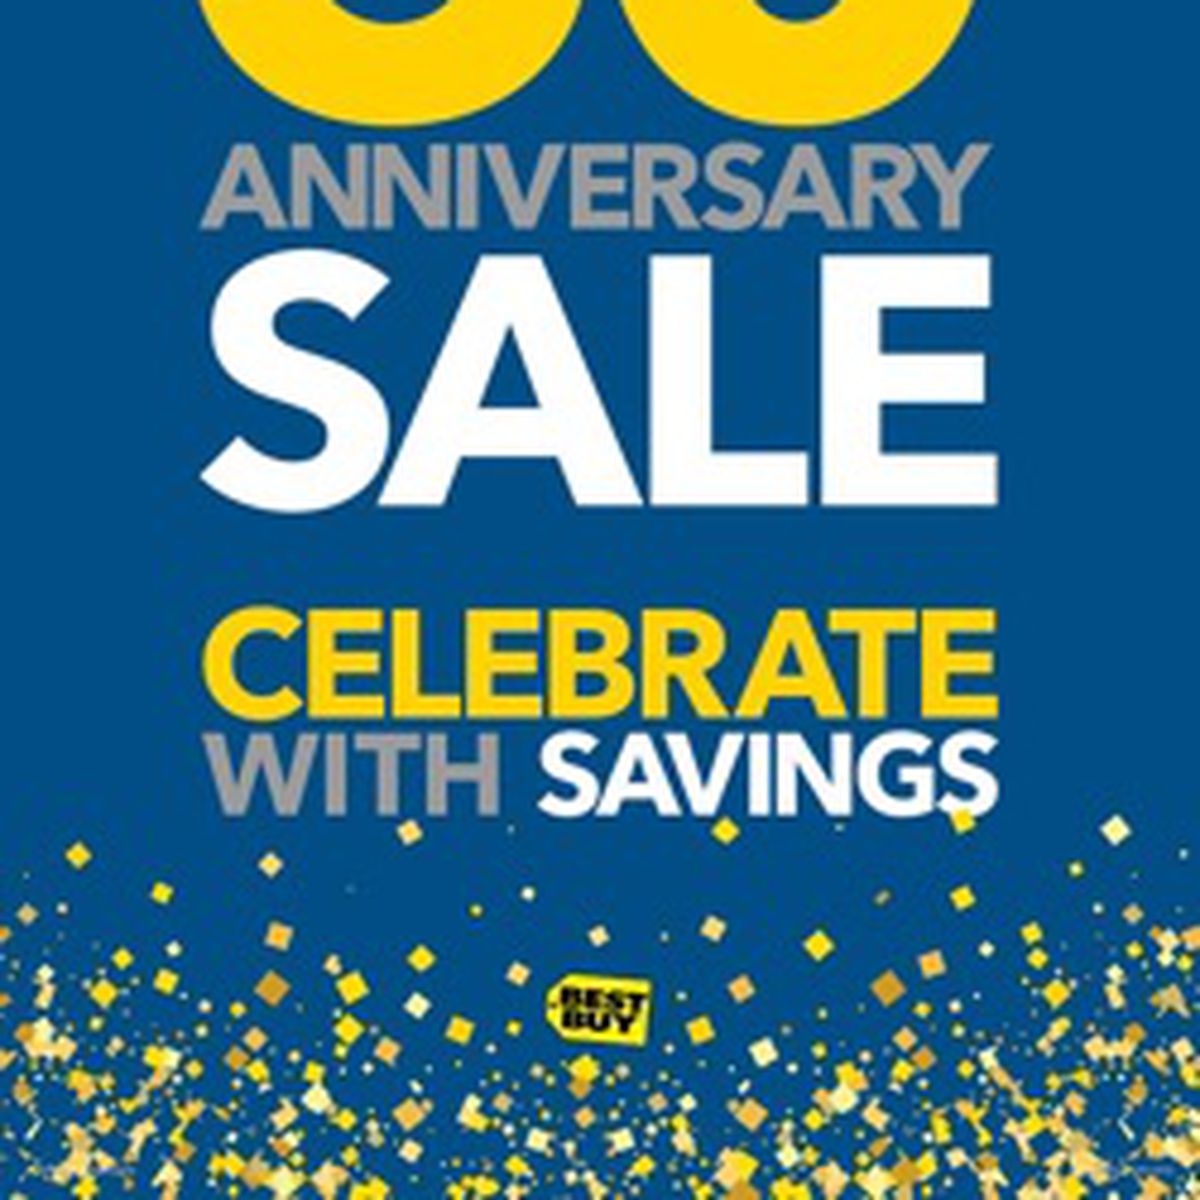 Best Buy Launches 50th Anniversary Sale With Discounts on MacBook Pro,  iPhone - MacRumors